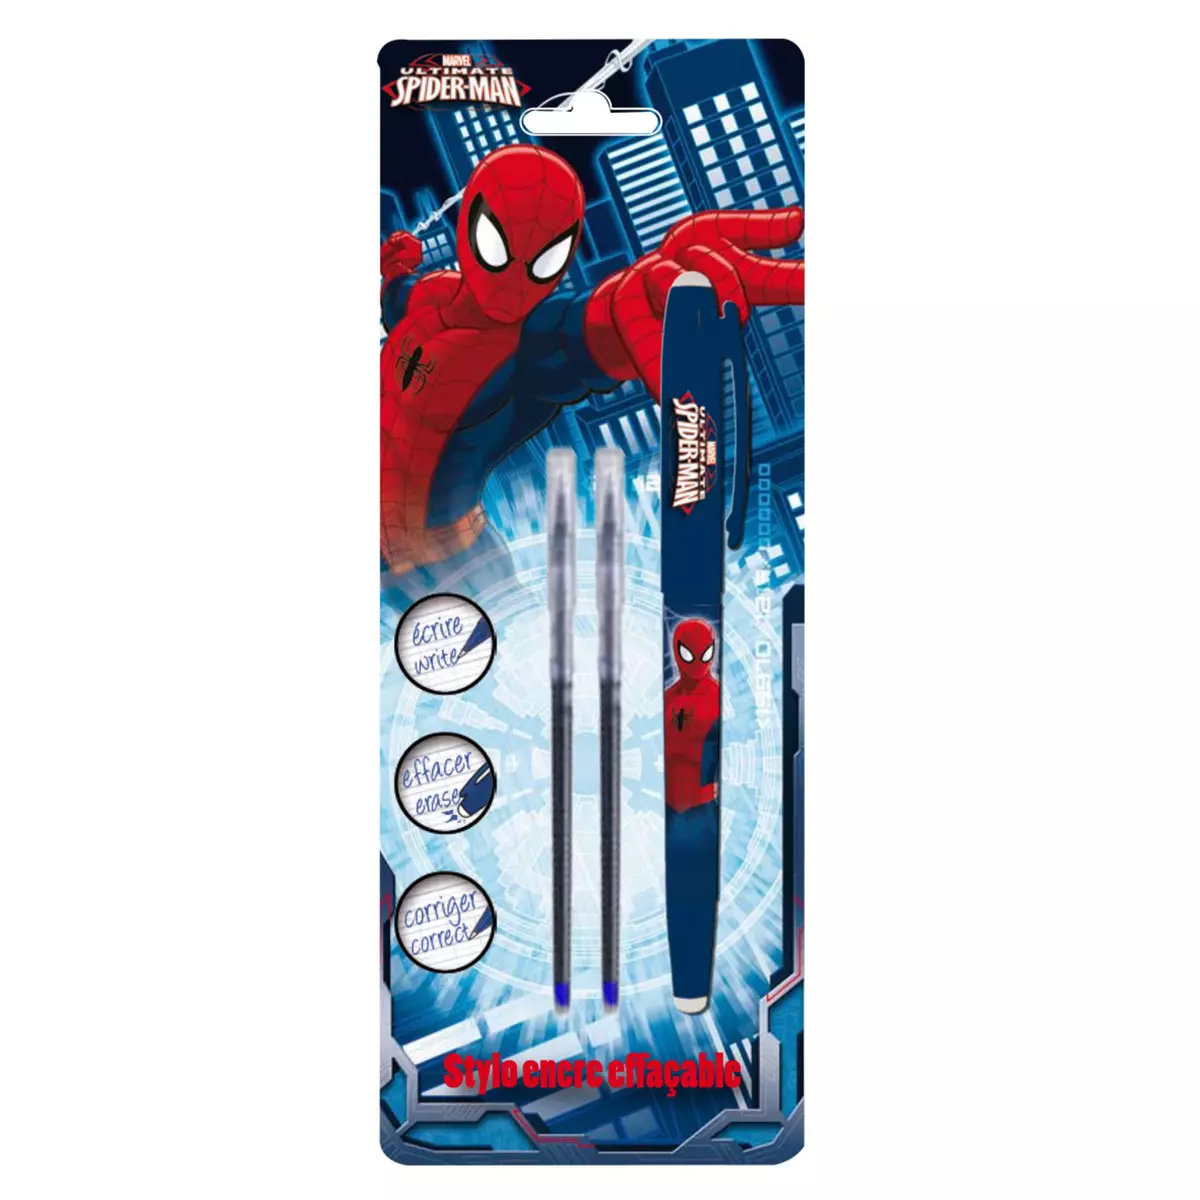 Stylo roller - Spiderman - 2 Recharges gel - Effacable